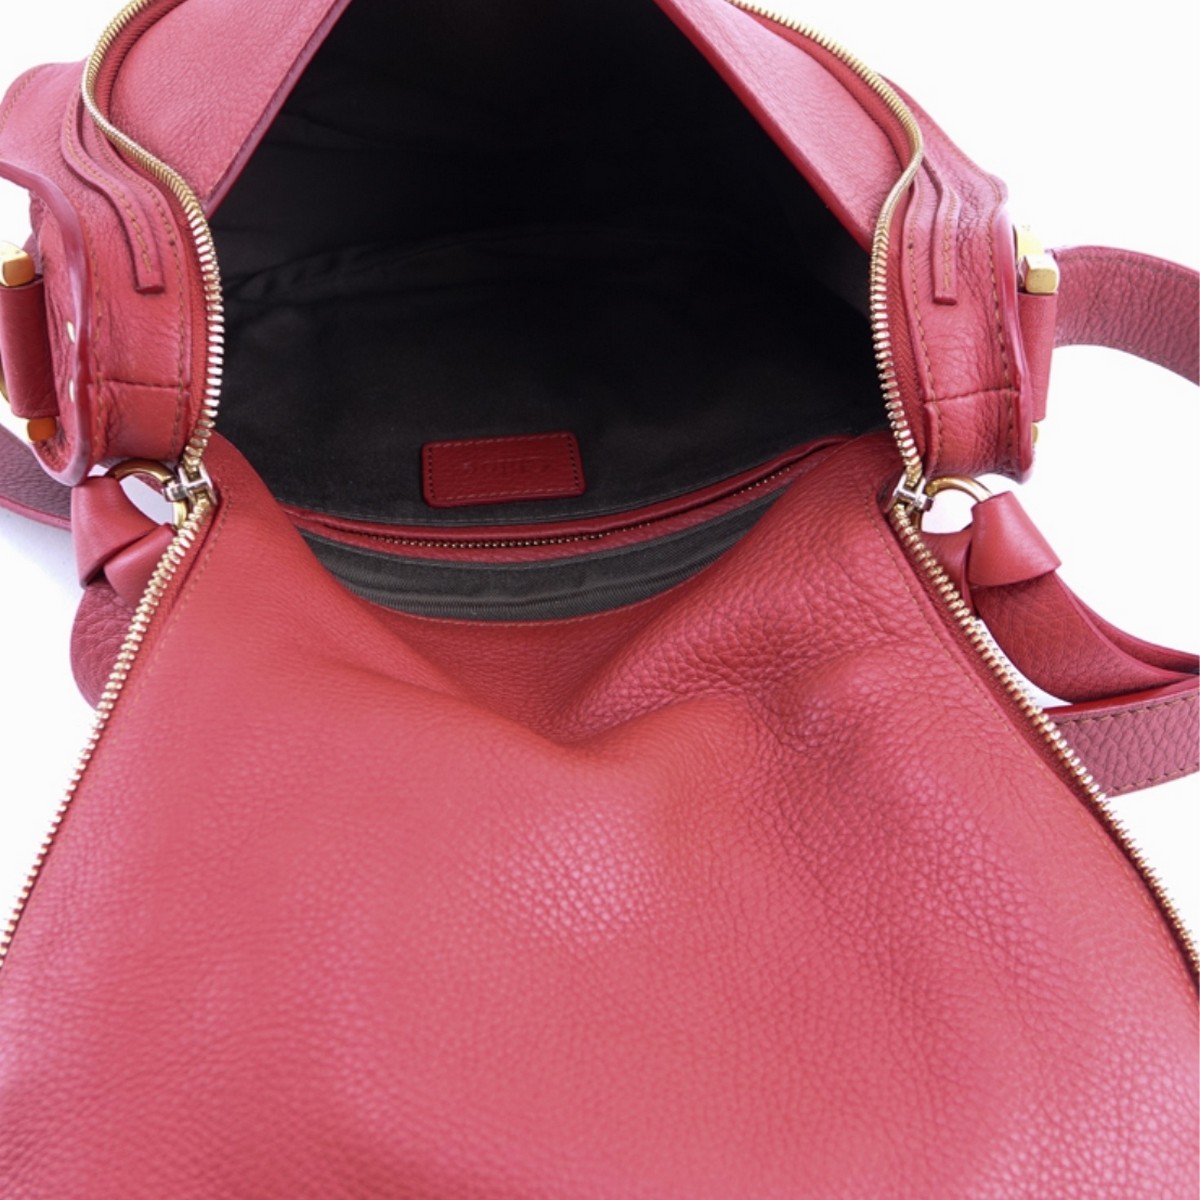 Chloe Grained Brique Leather Marcie Hobo